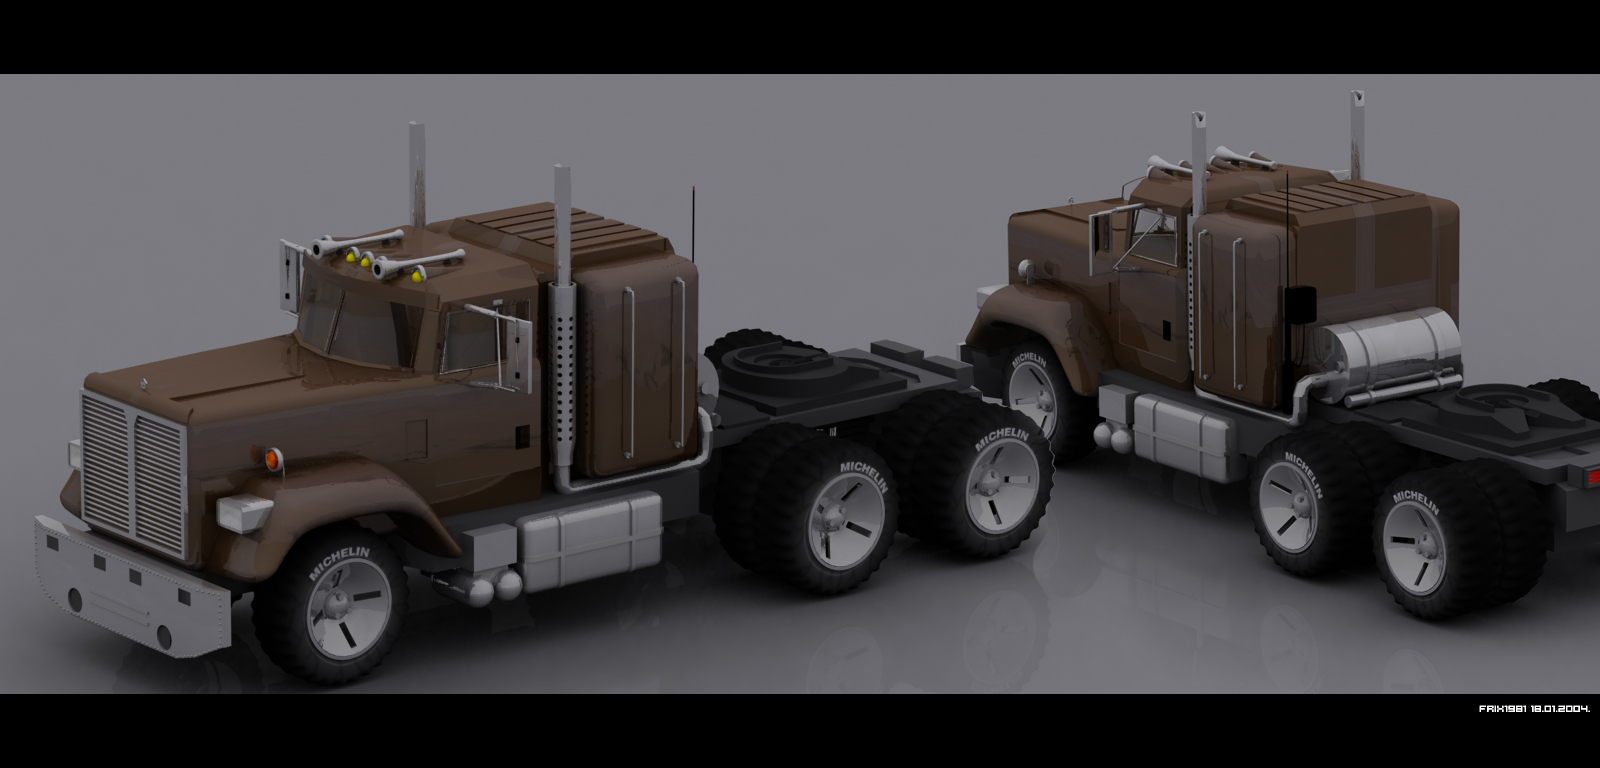 BigTruck by FriX1981